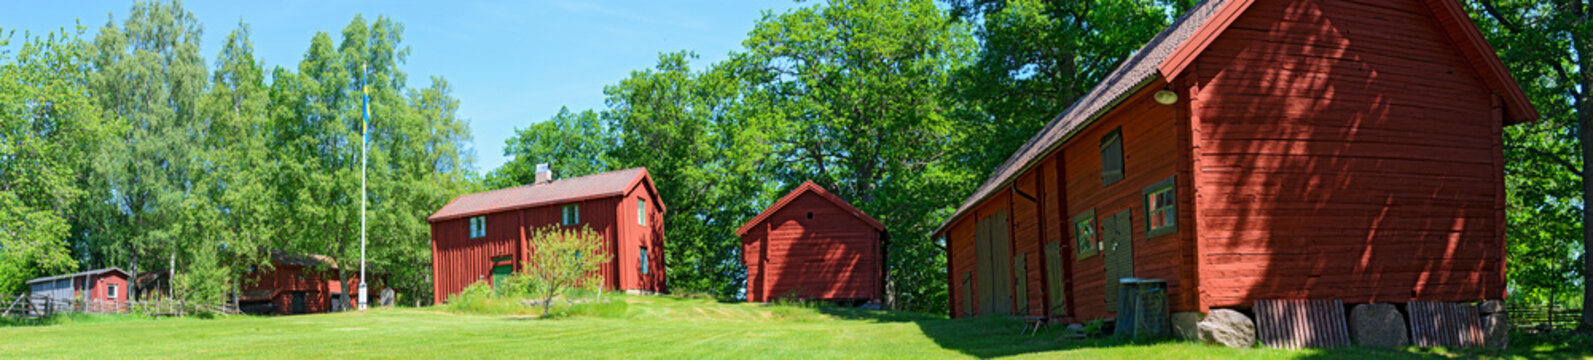 old wooden houses painted with traditional falunred color at an open-air museum in Sweden